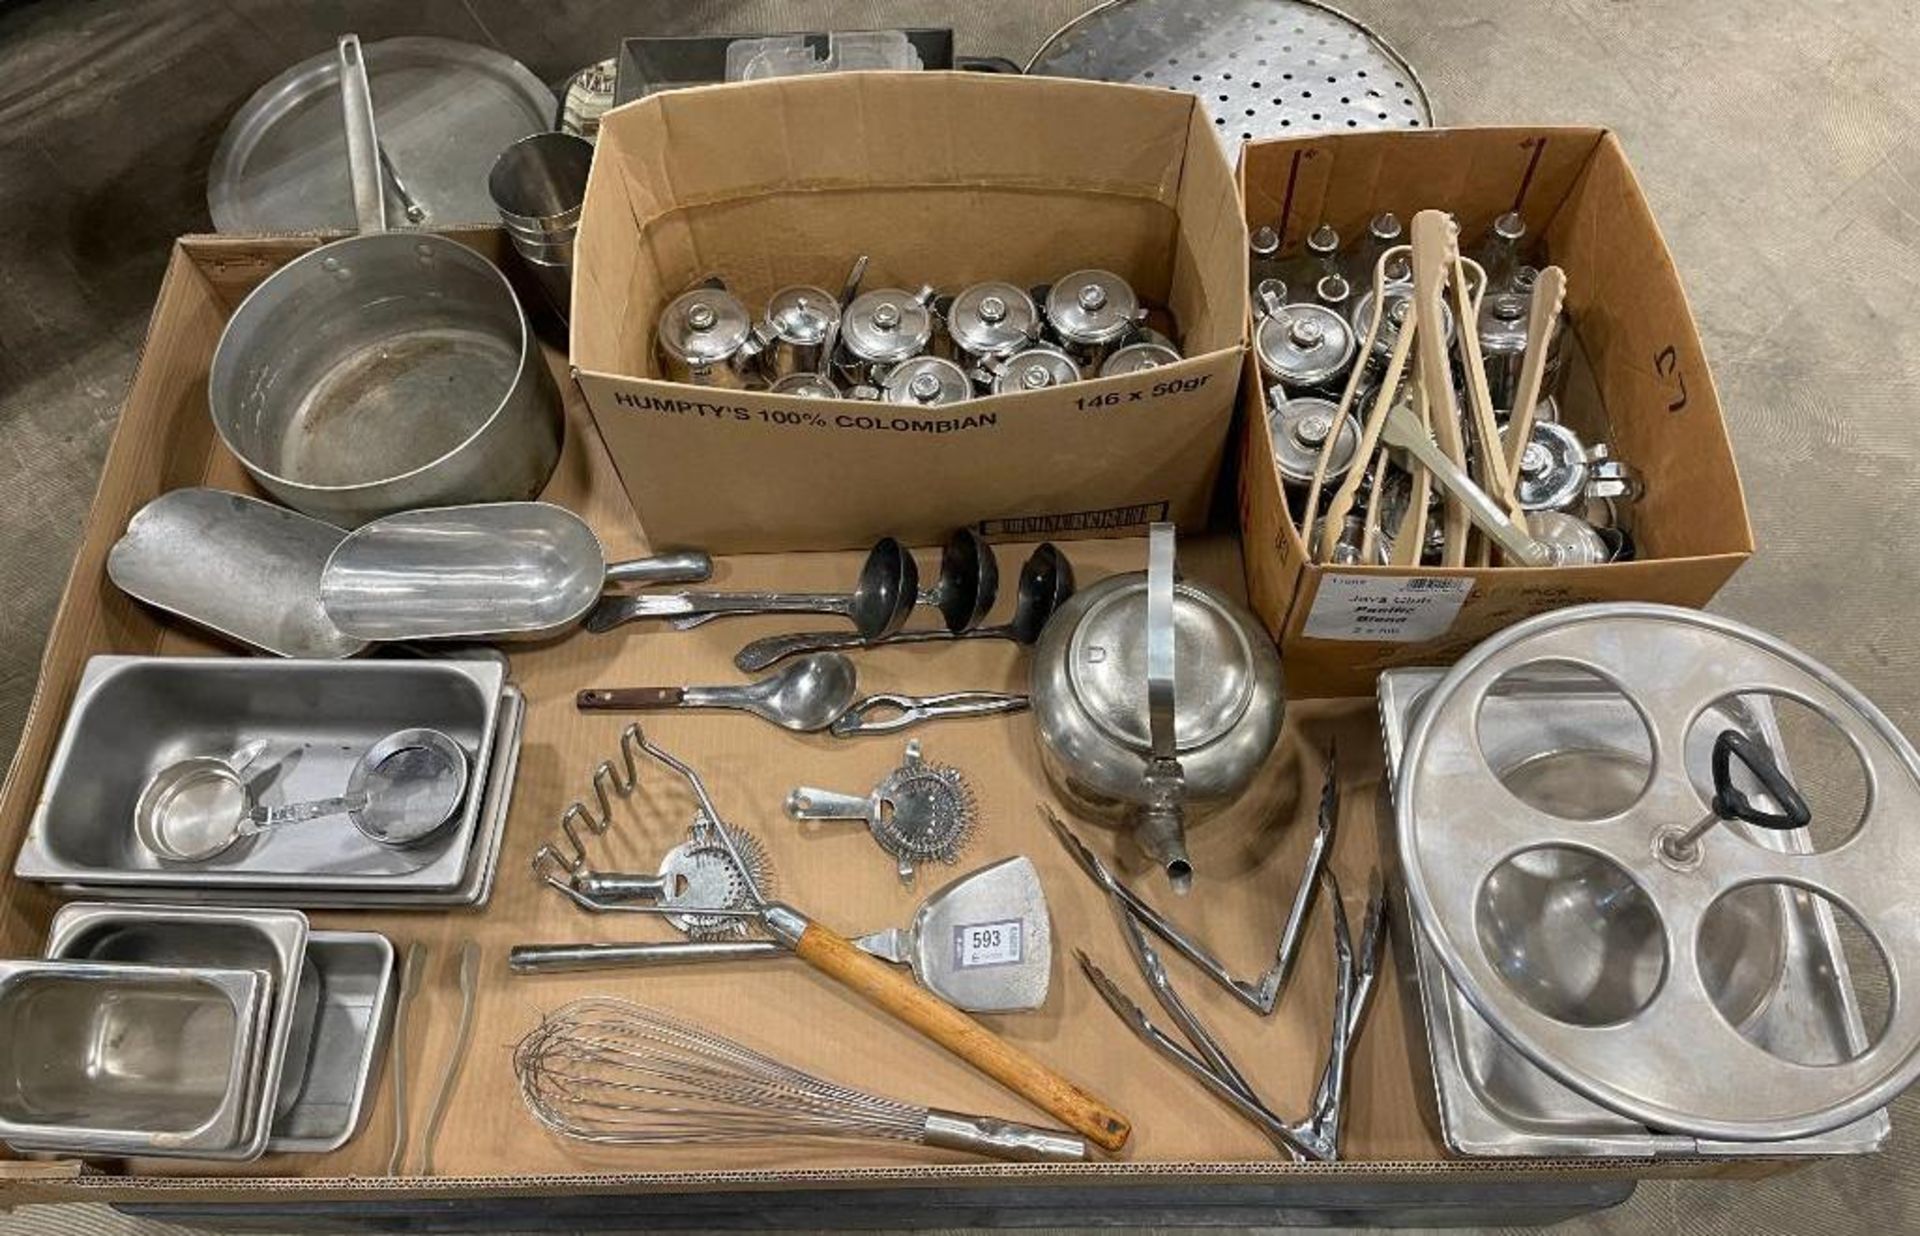 LOT OF ASSORTED KITCHEN ITEMS INCLUDING: INSERTS, TONGS, SCOOPS, TEAPOTS